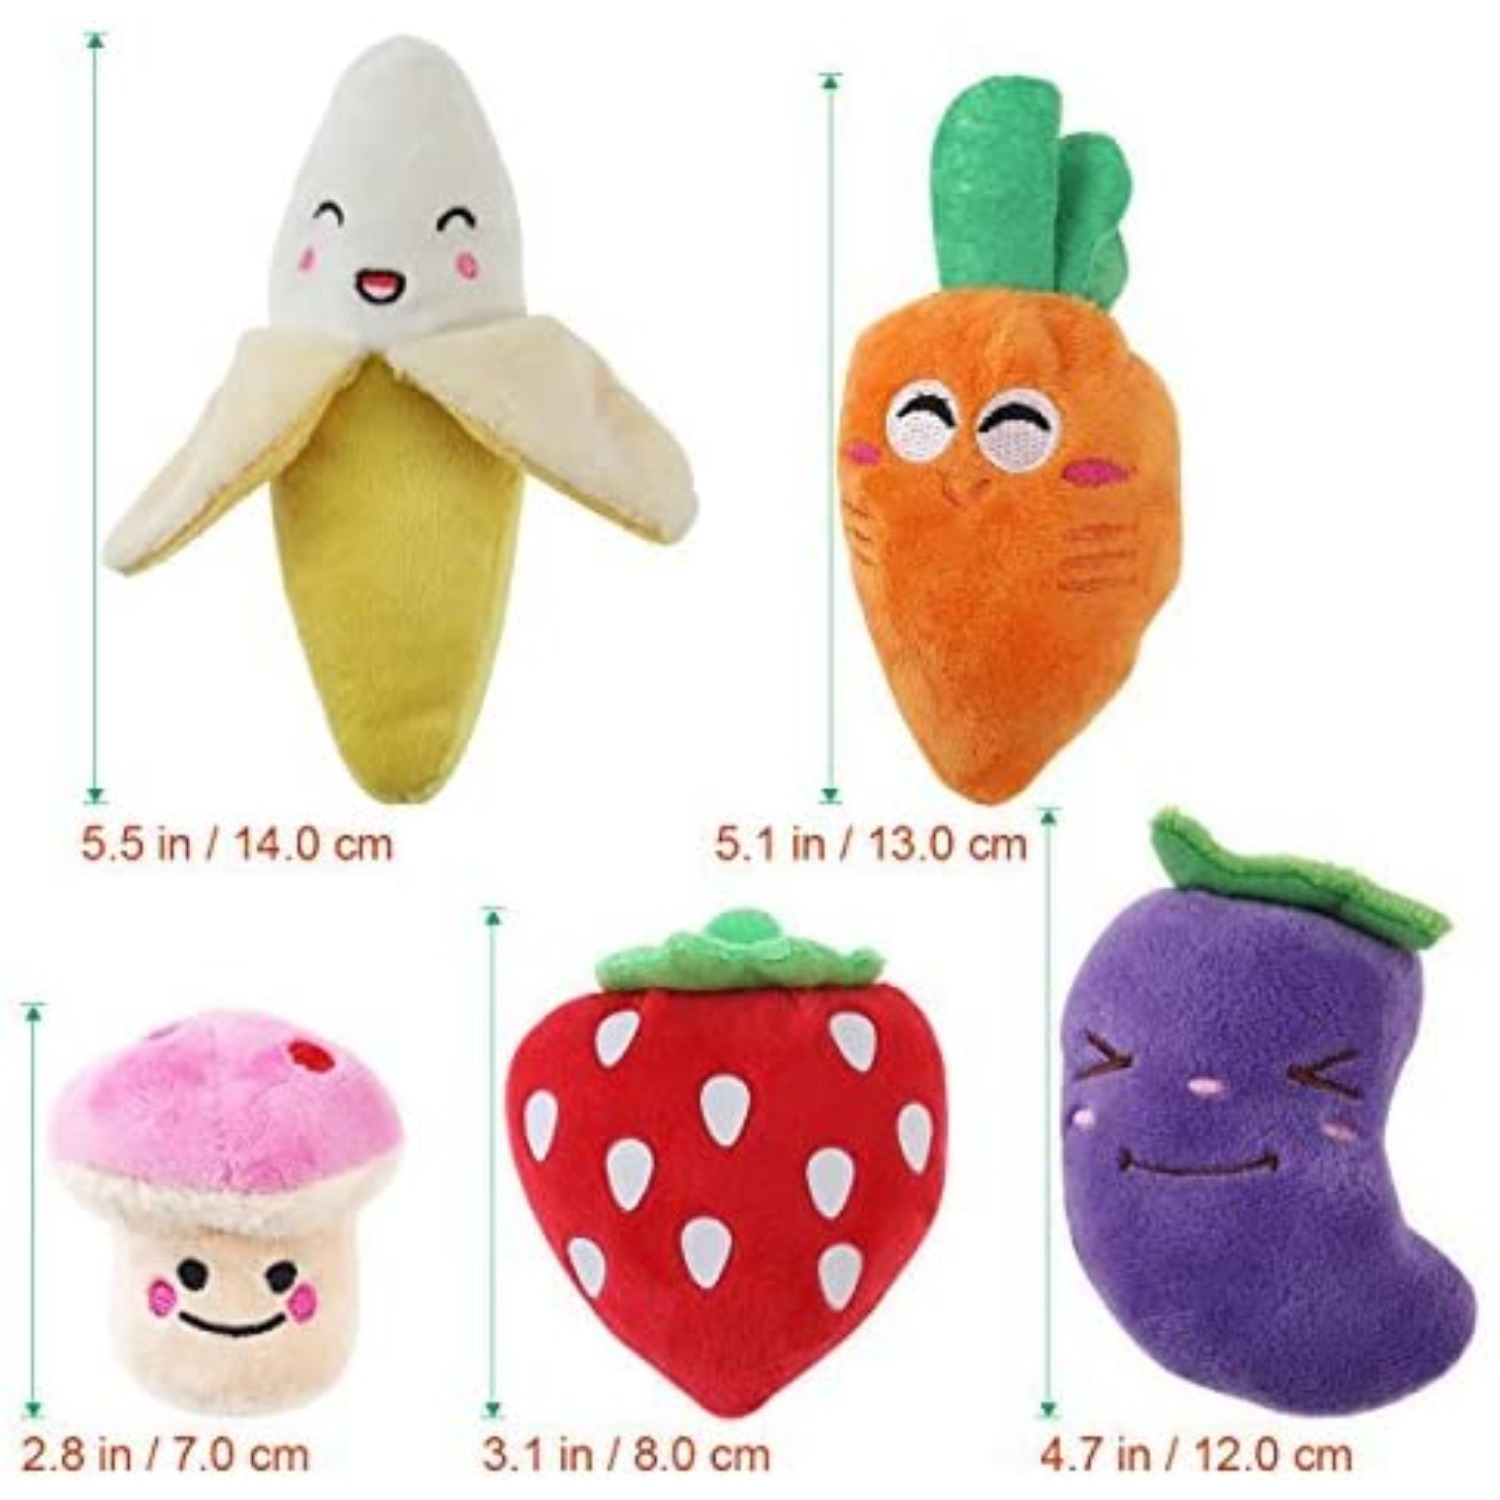 Altatac 5 Pack Fruits Vegetables Squeaky Small Plush Puppy Dog Chew Toys 2.8"-5.5"